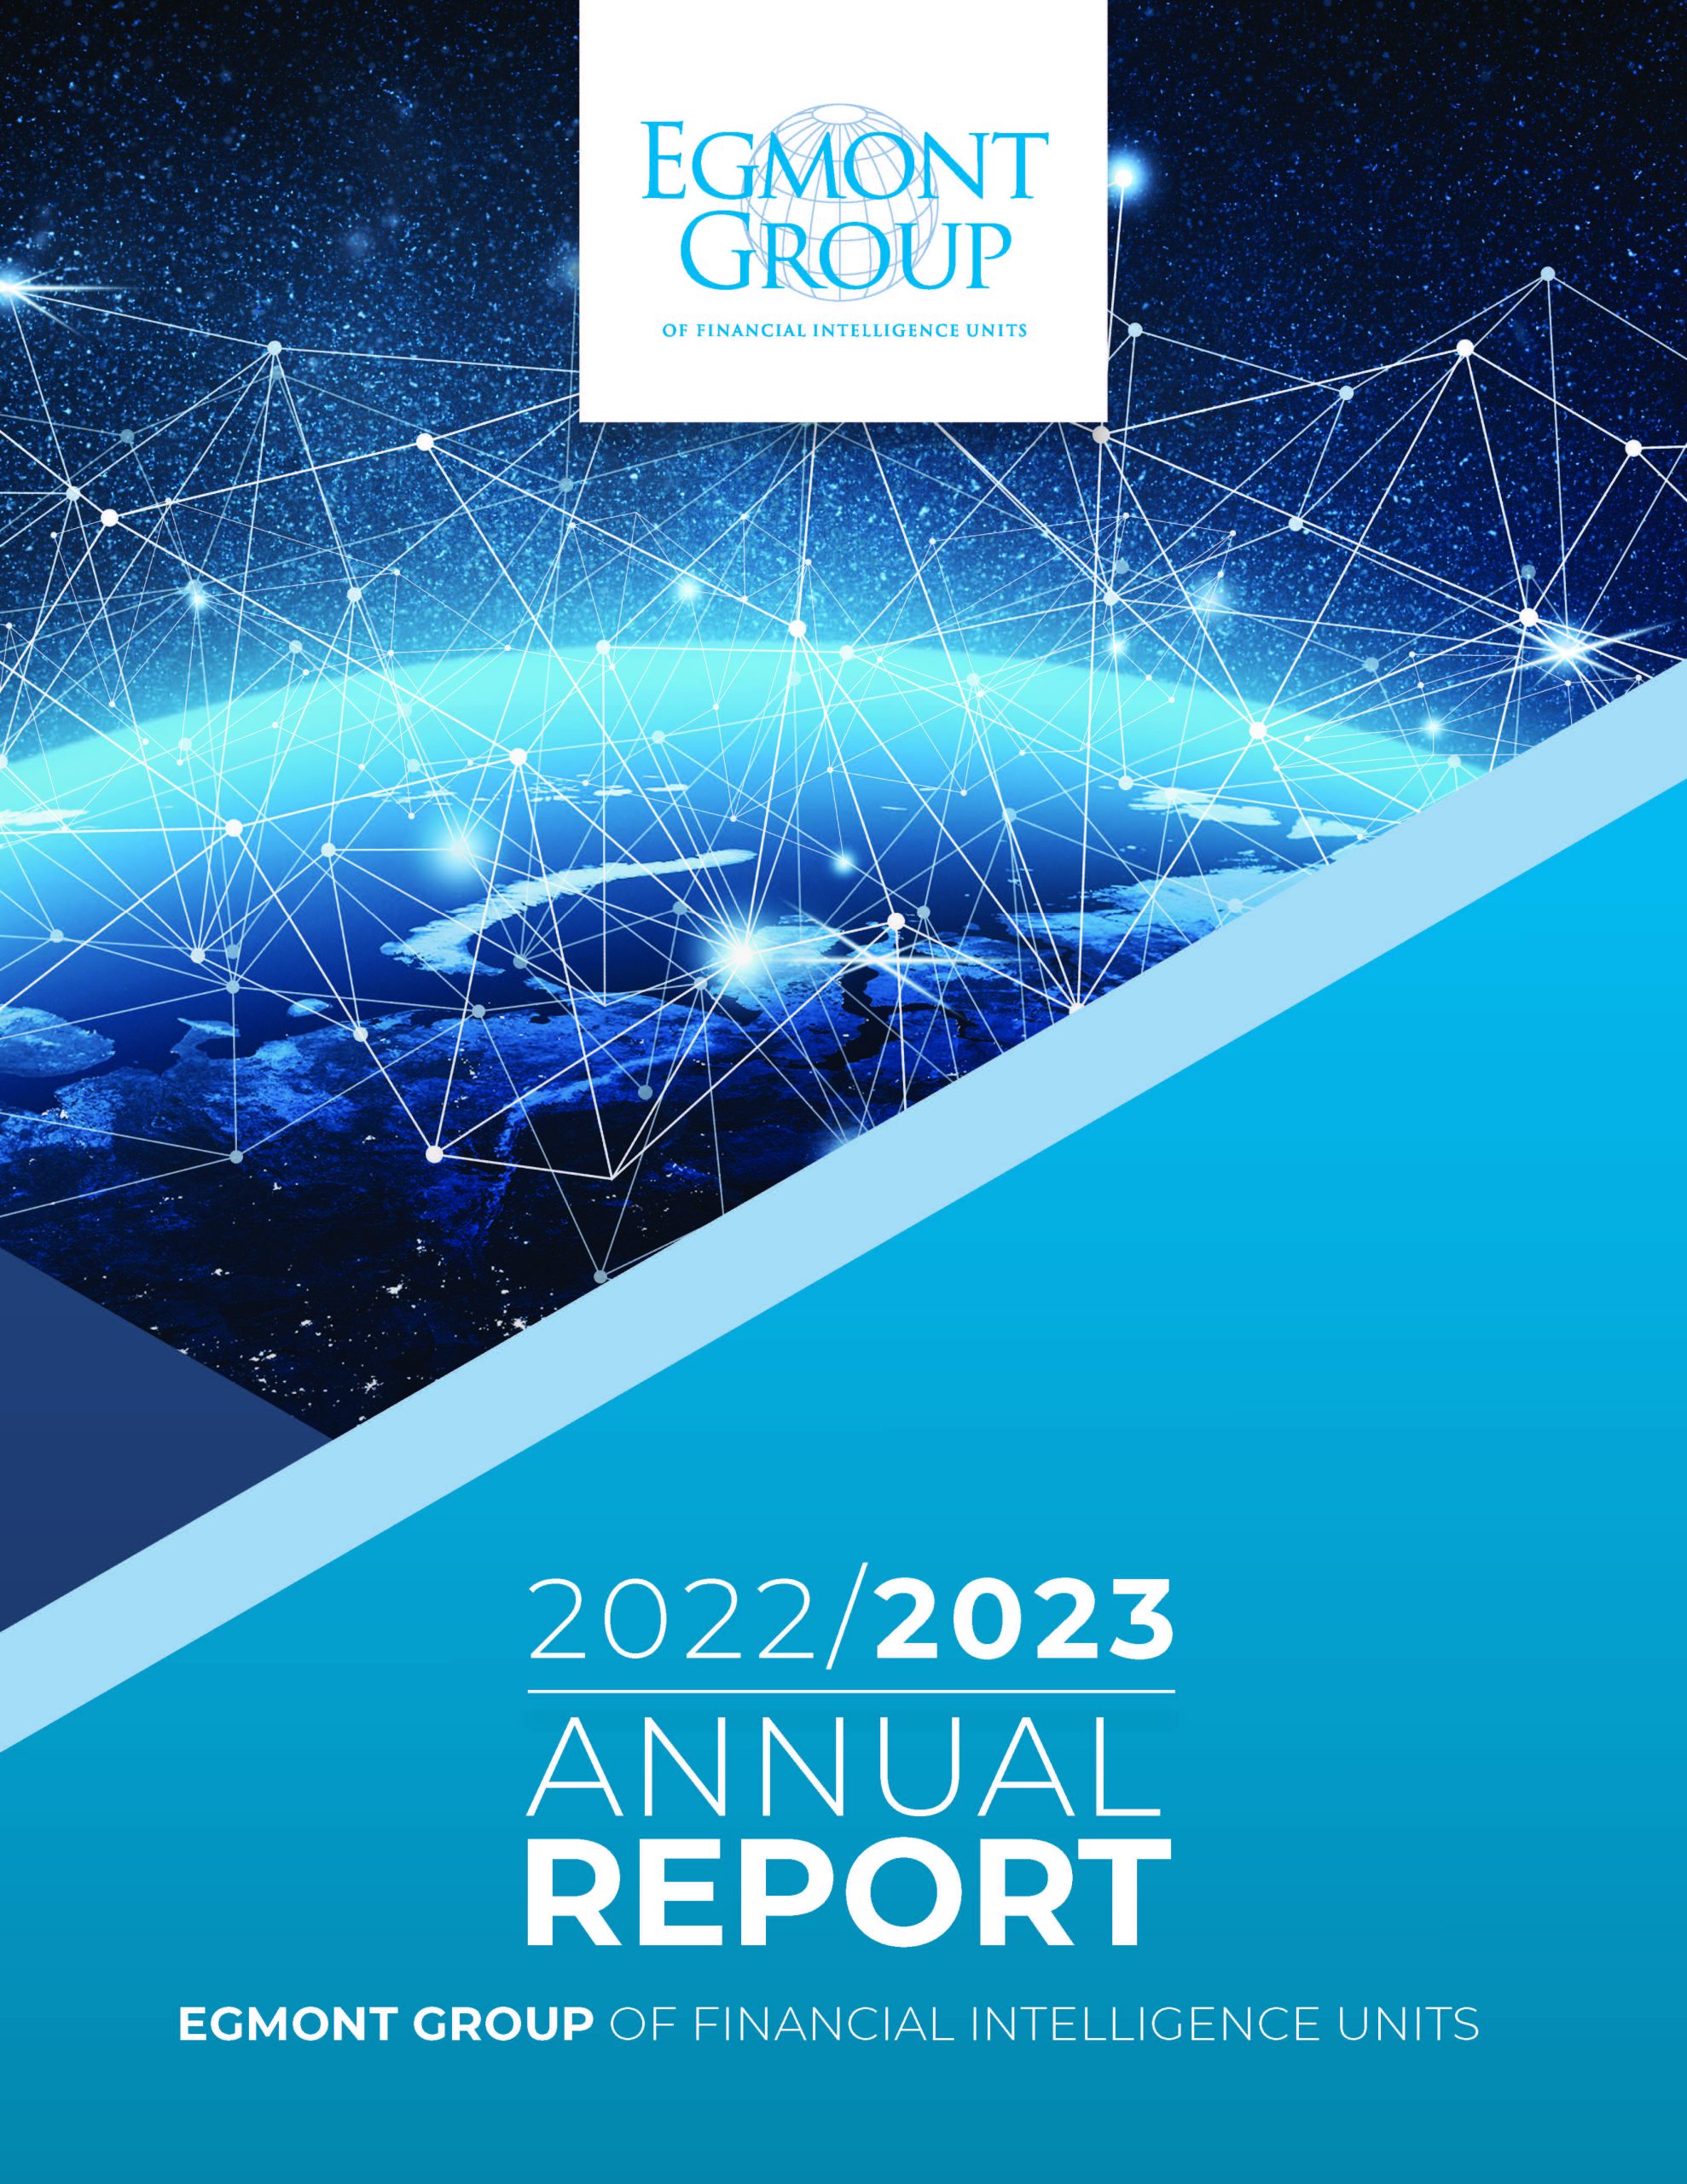 Egmont Group Annual Report 2022-2023